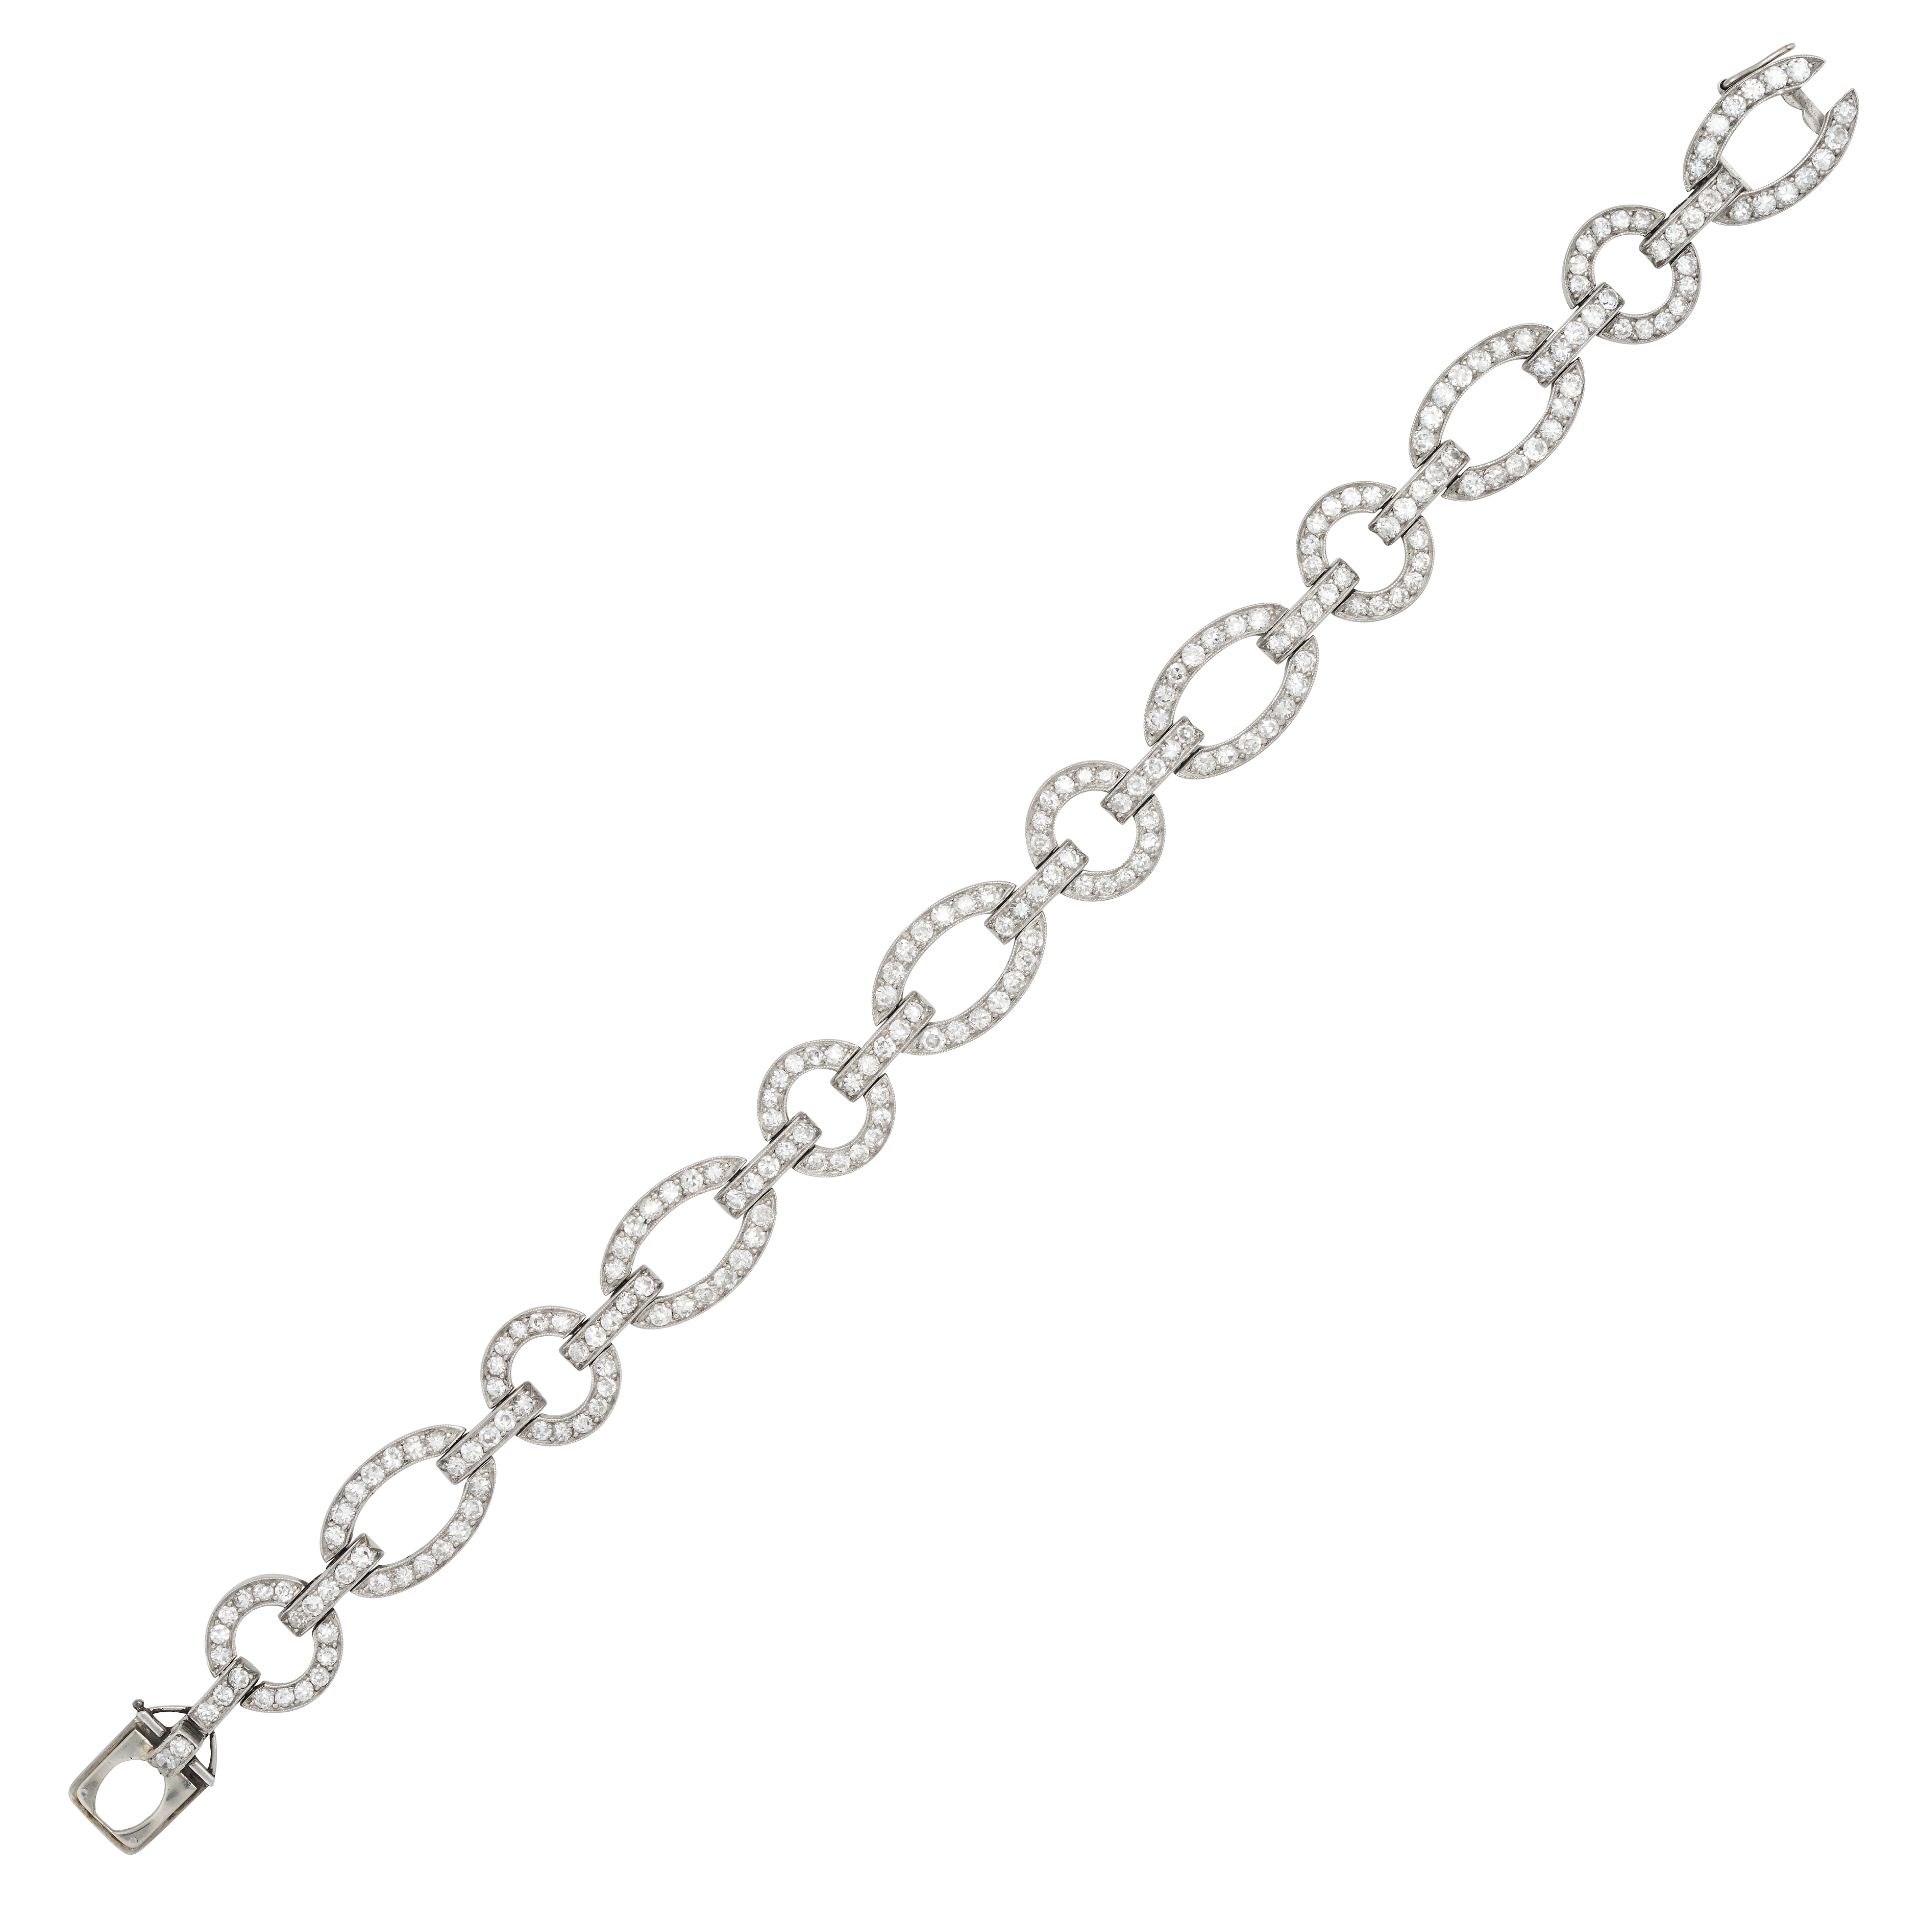 CARTIER, AN ART DECO DIAMOND BRACELET in platinum and white gold, comprising a row of oval and ci...